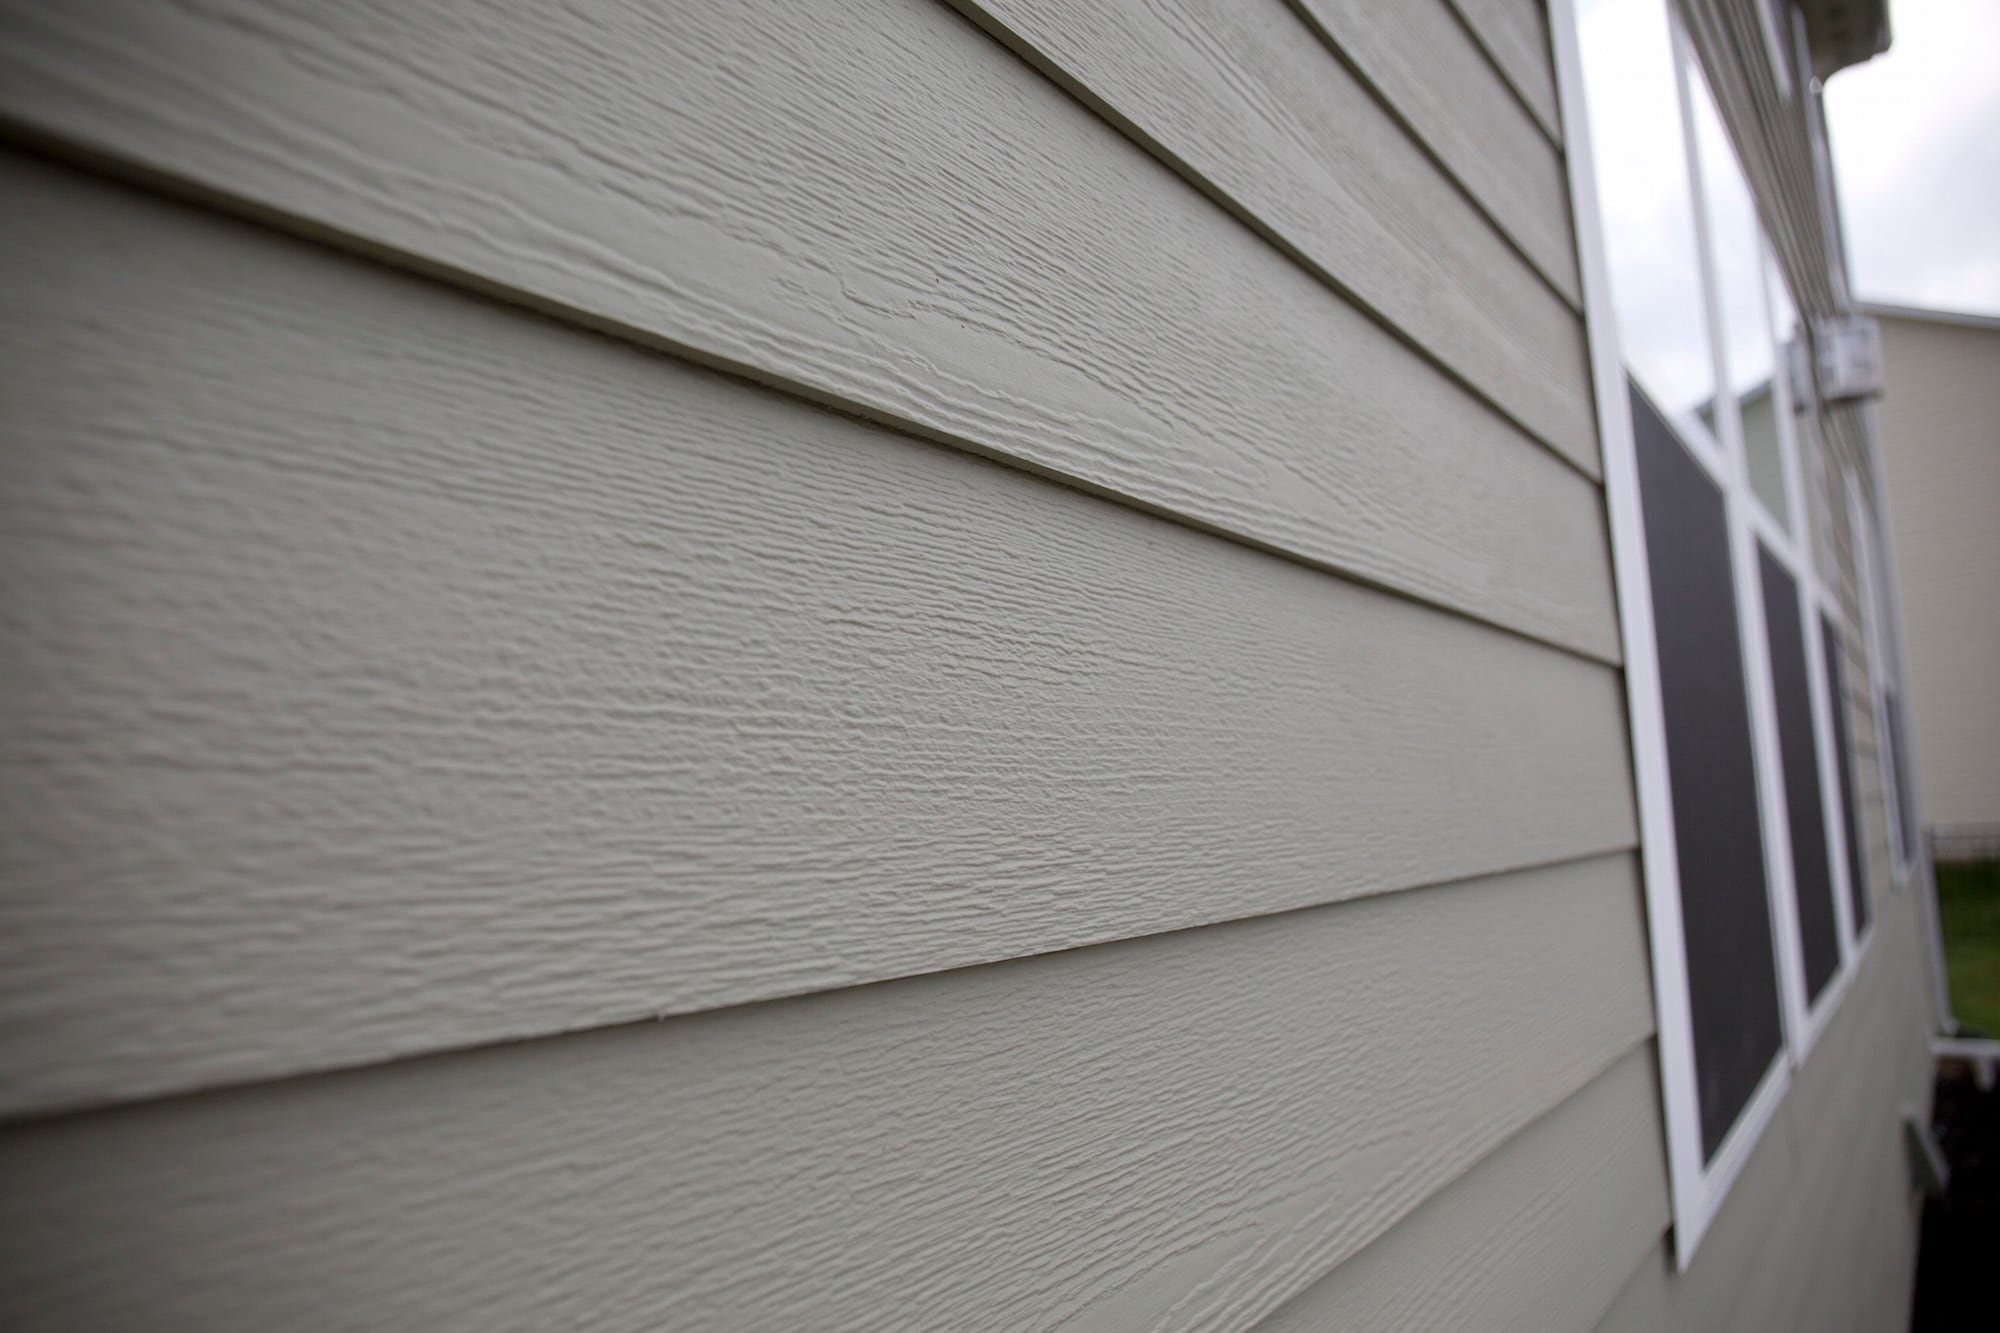 Can You Install Fiber Cement Siding Over Wood Siding Interior